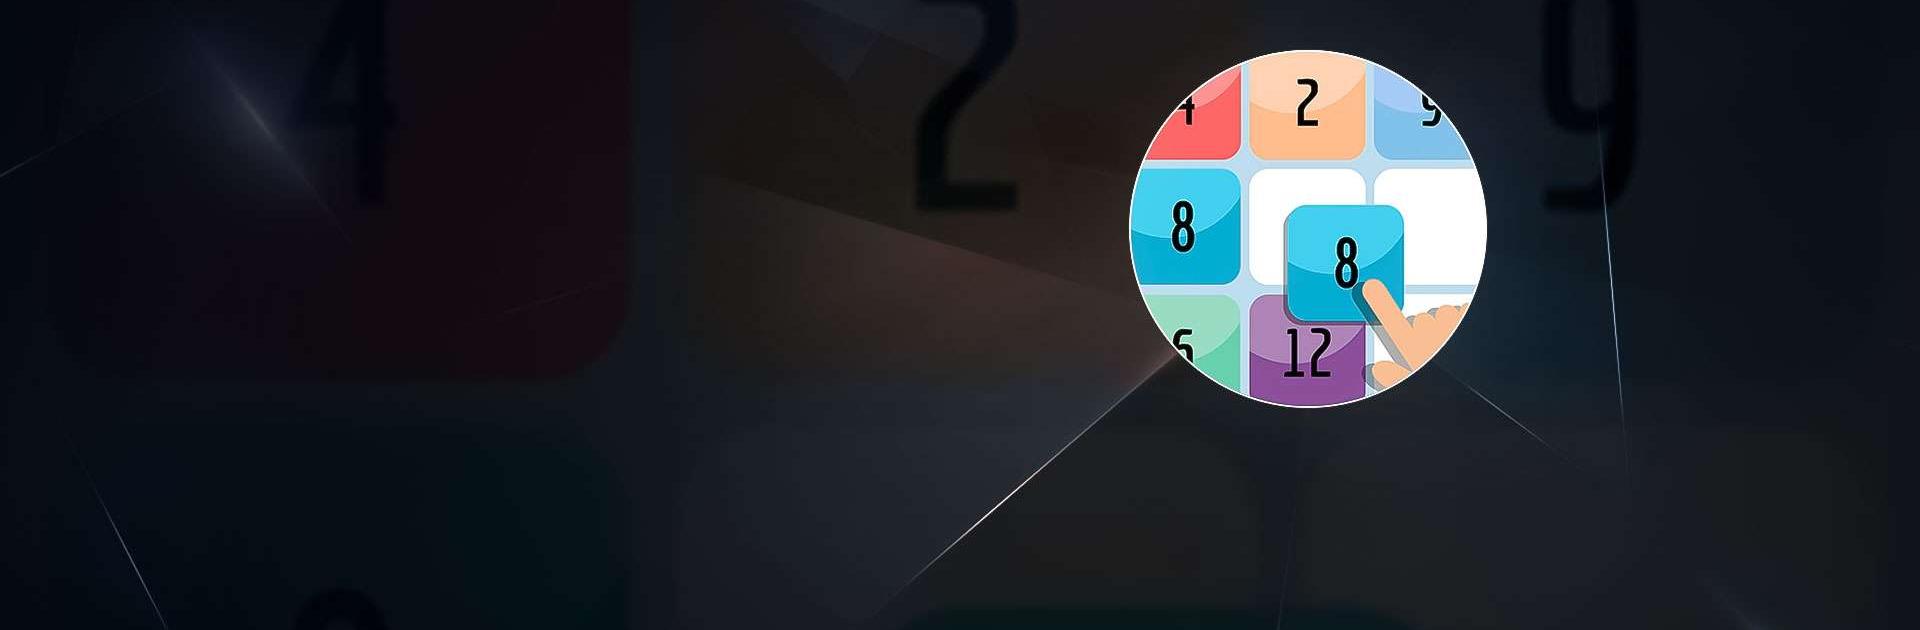 Fused: Number Puzzle Game